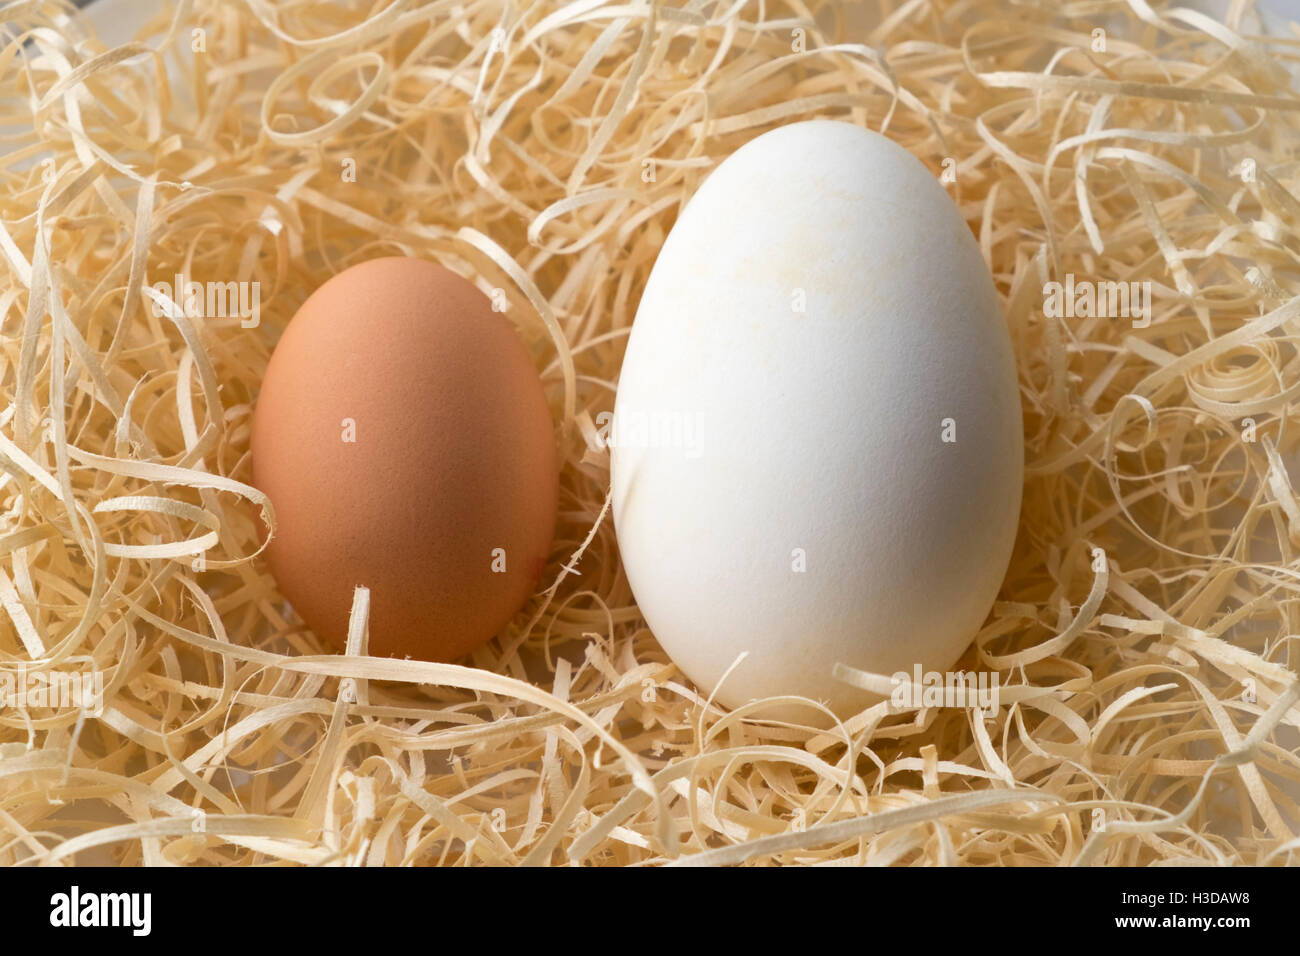 Pair of eggs, chicken and goose side by side Stock Photo